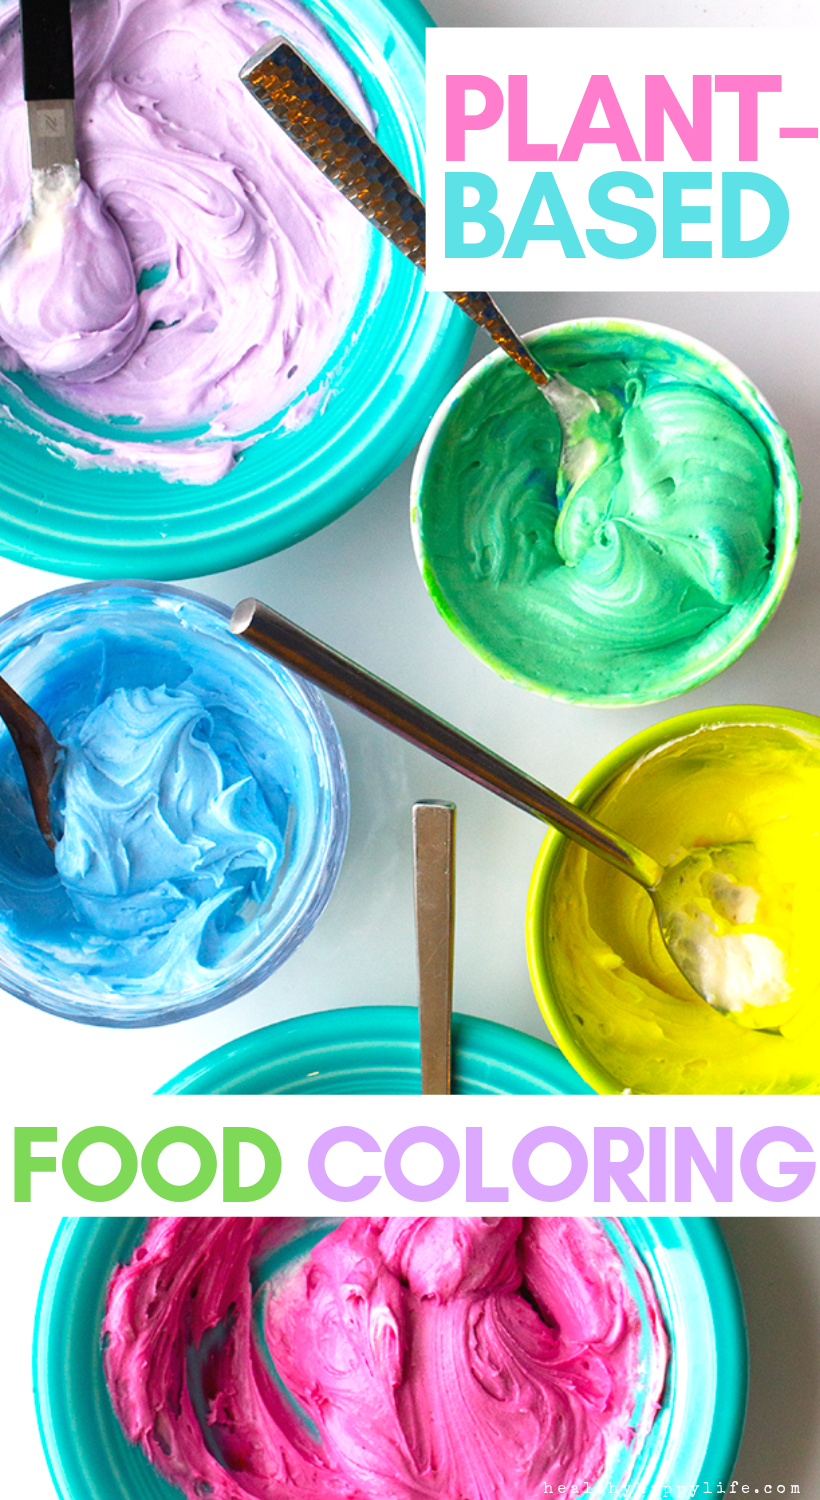 Natural Food Coloring - HealthyHappyLife.com - Natural Food Coloring - HealthyHappyLife.com -   19 diy Food vegan ideas